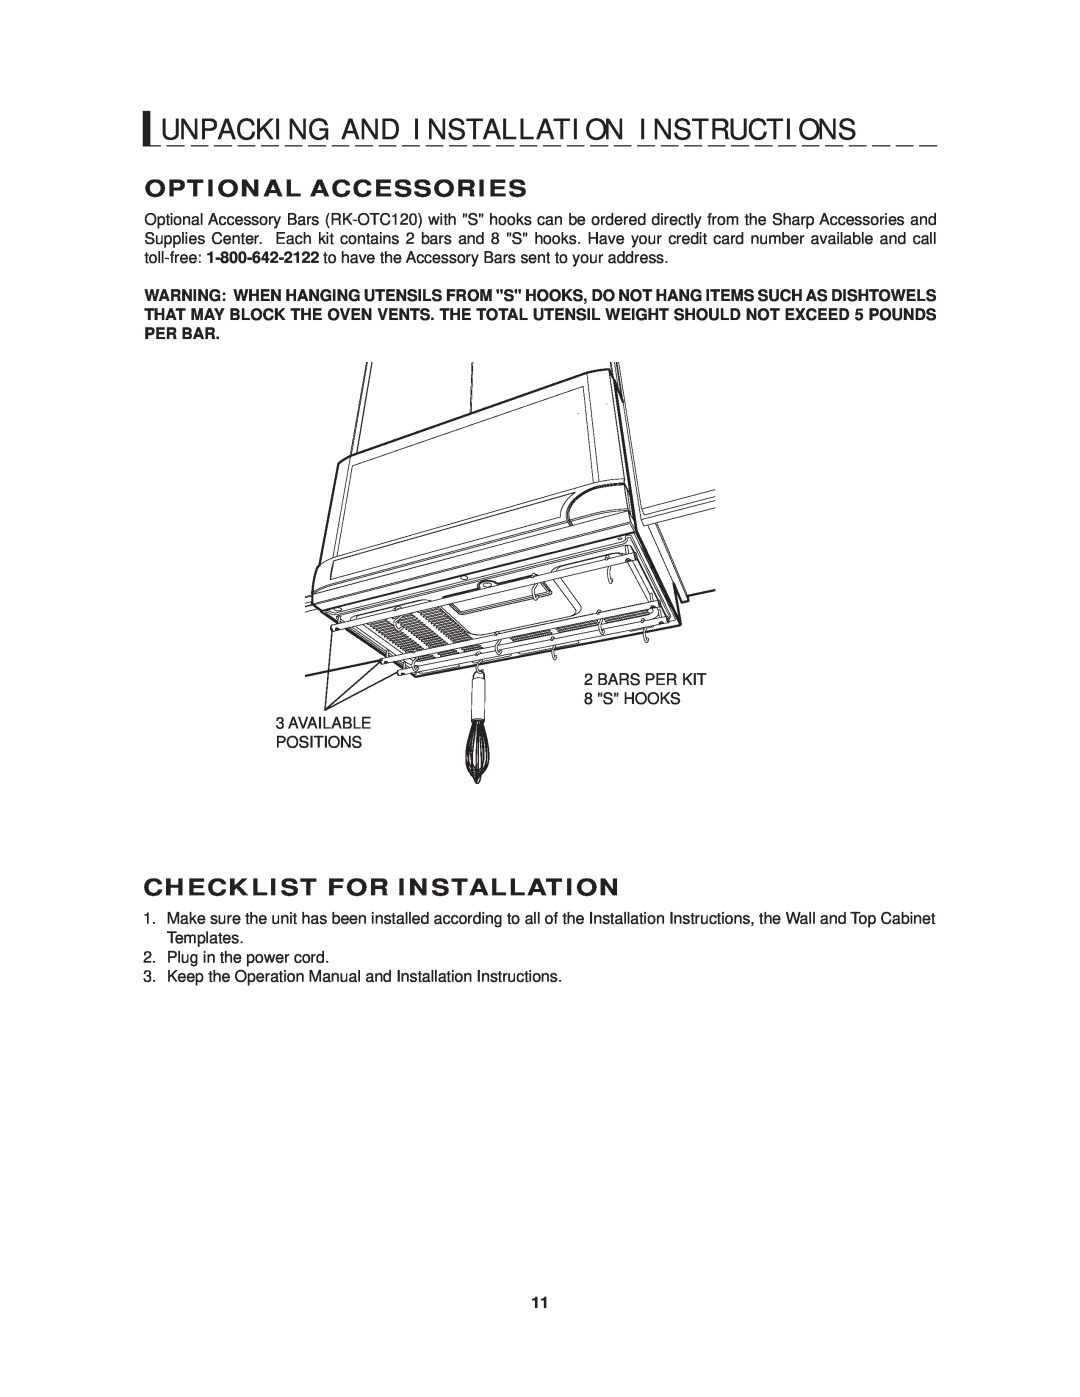 Sharp R-1214 operation manual Optional Accessories, Checklist For Installation 